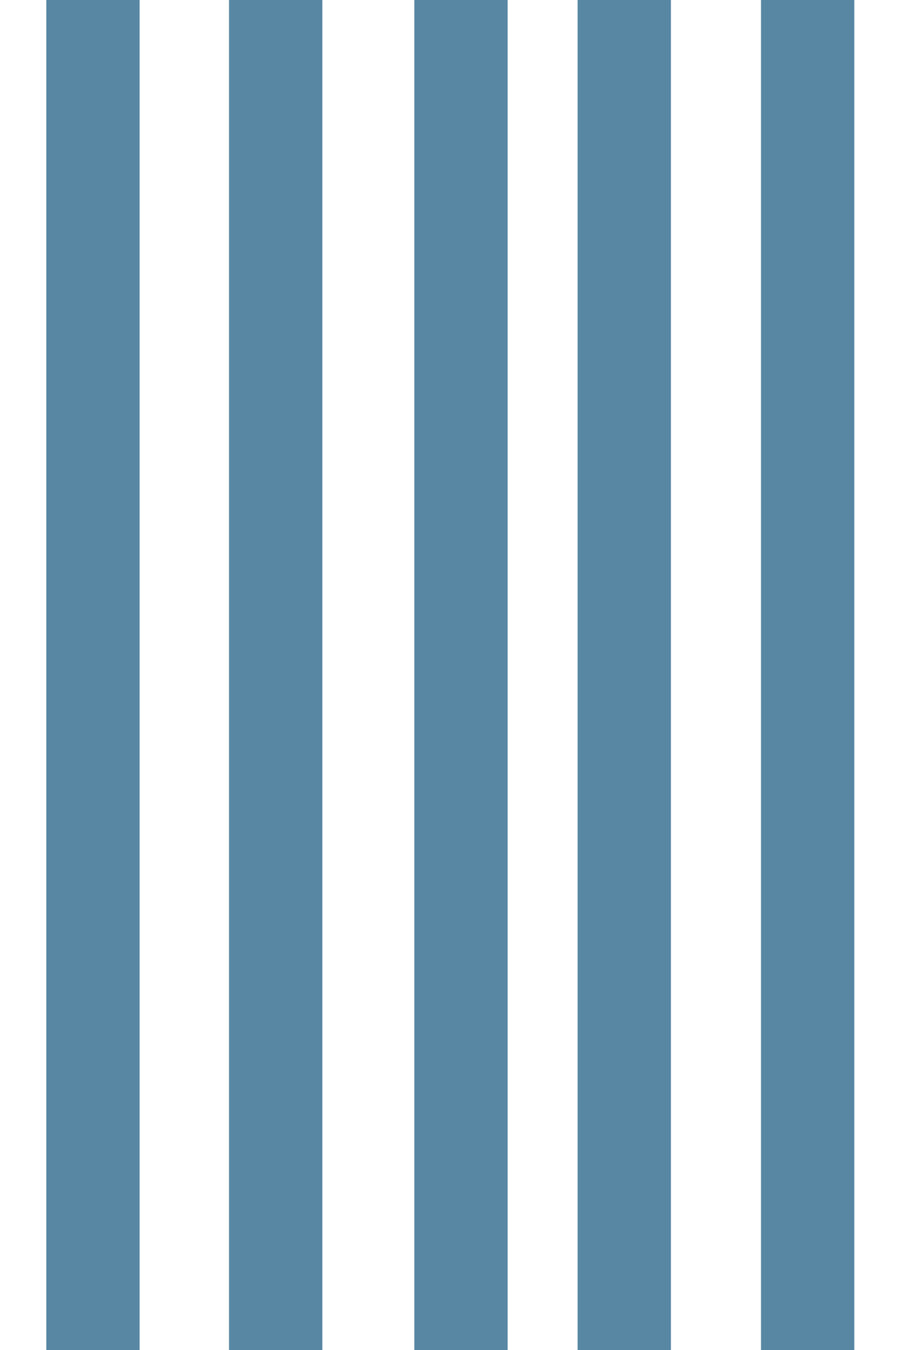 Woolf With Me Fitted Crib Sheet Stripes color_niagara